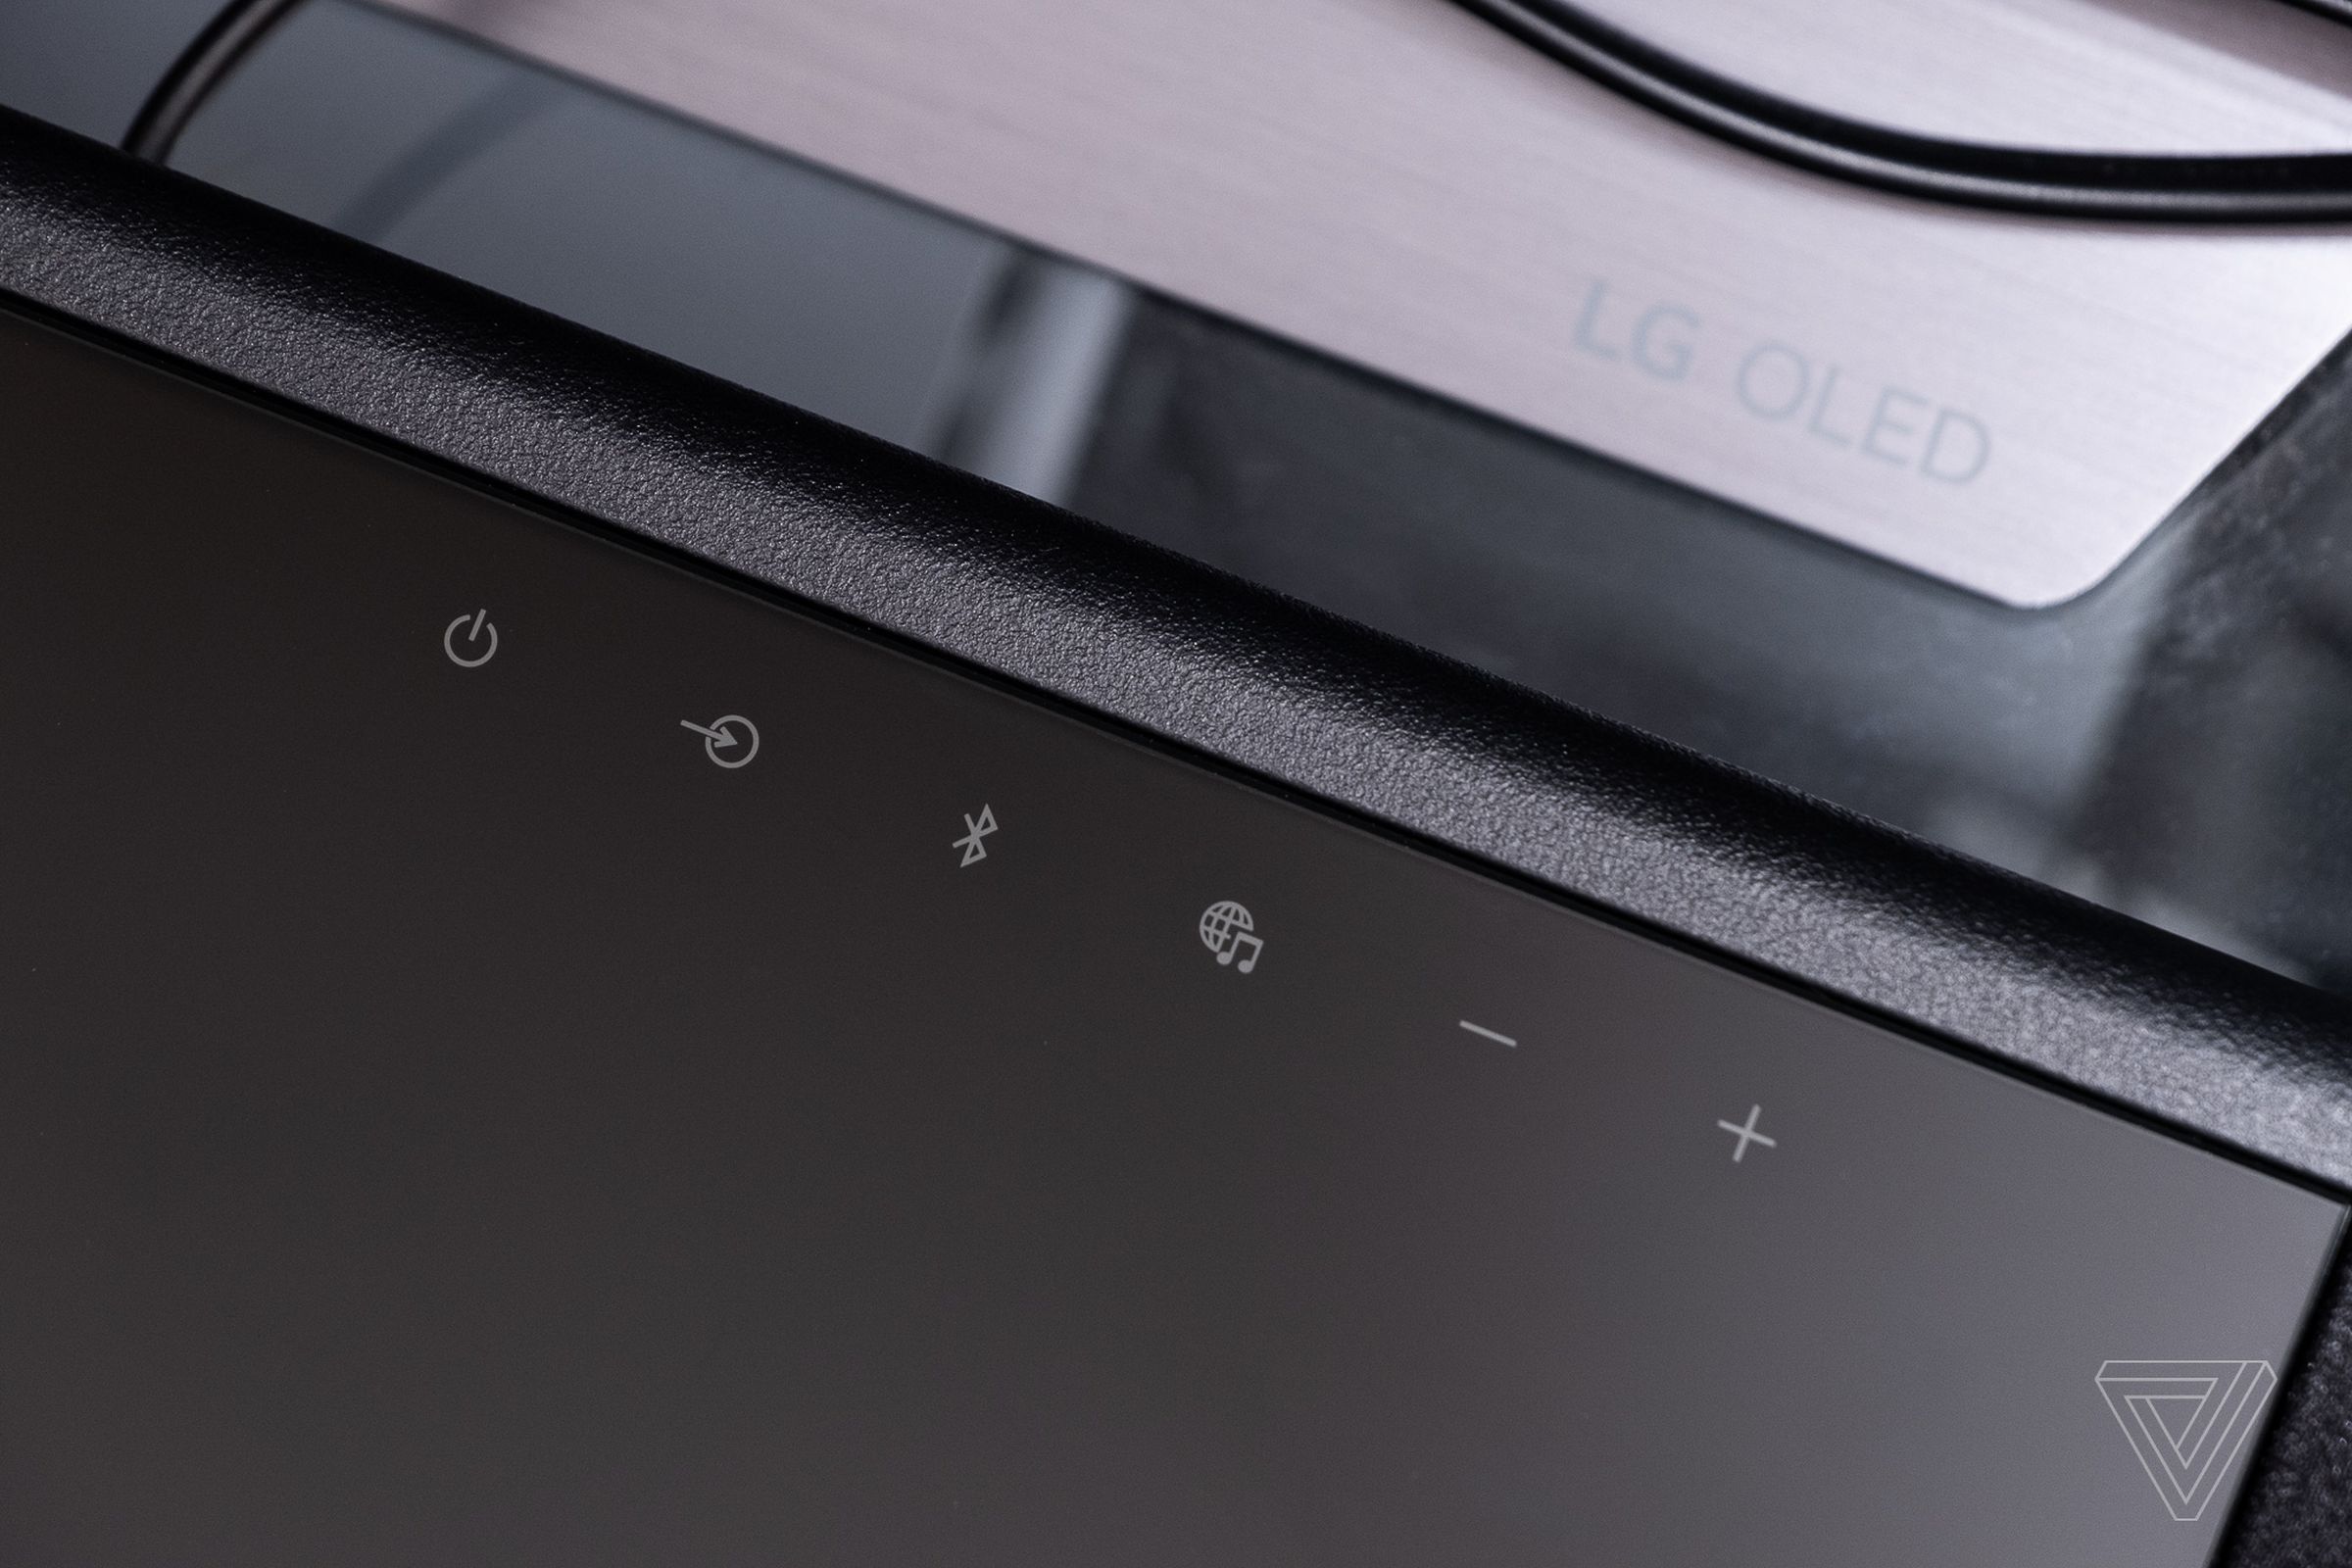 There are touch controls on the soundbar’s glass surface.